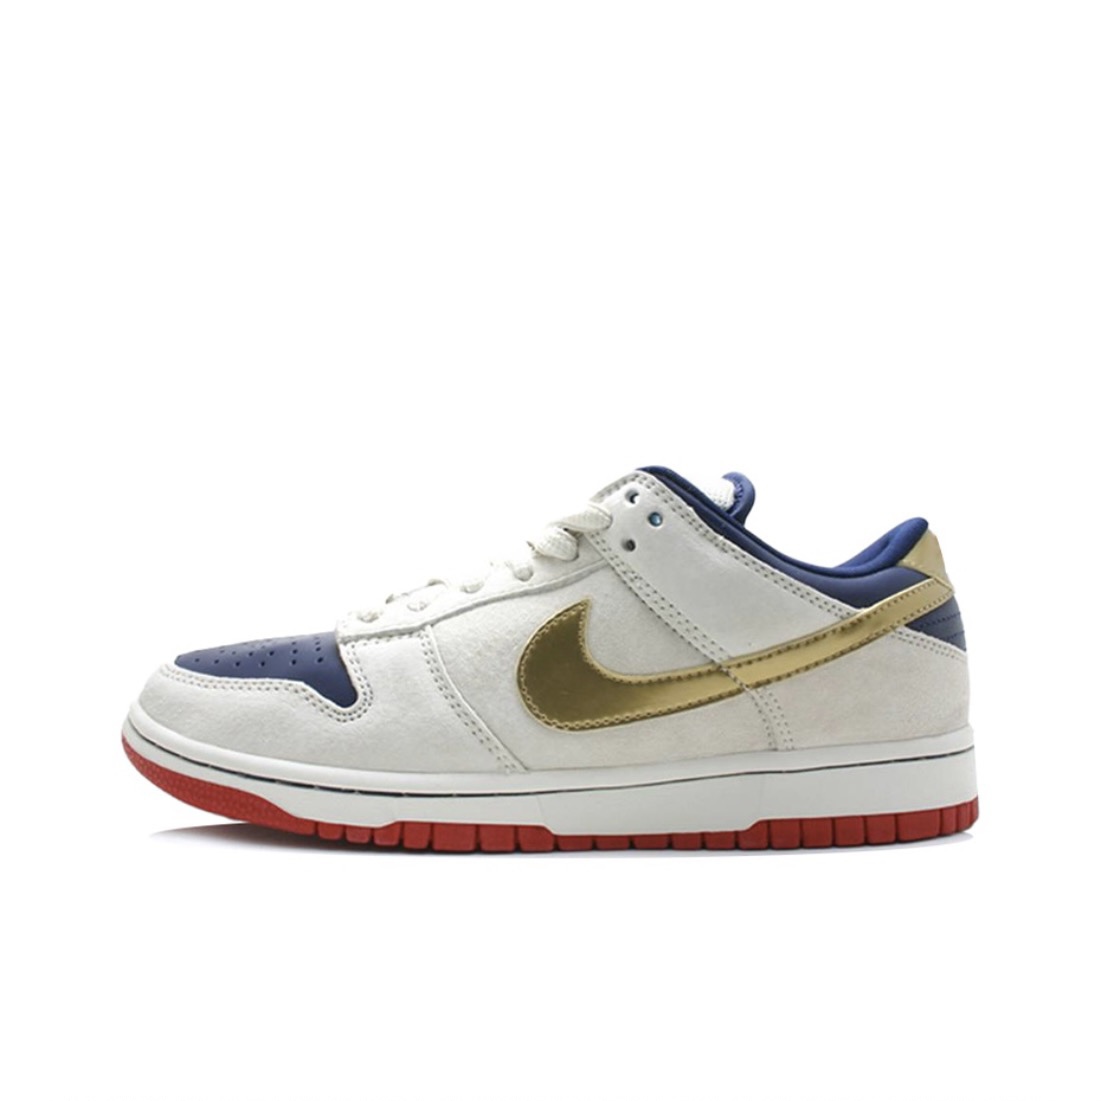 NIKE SB DUNK LOW OLD SPICE 304292 272